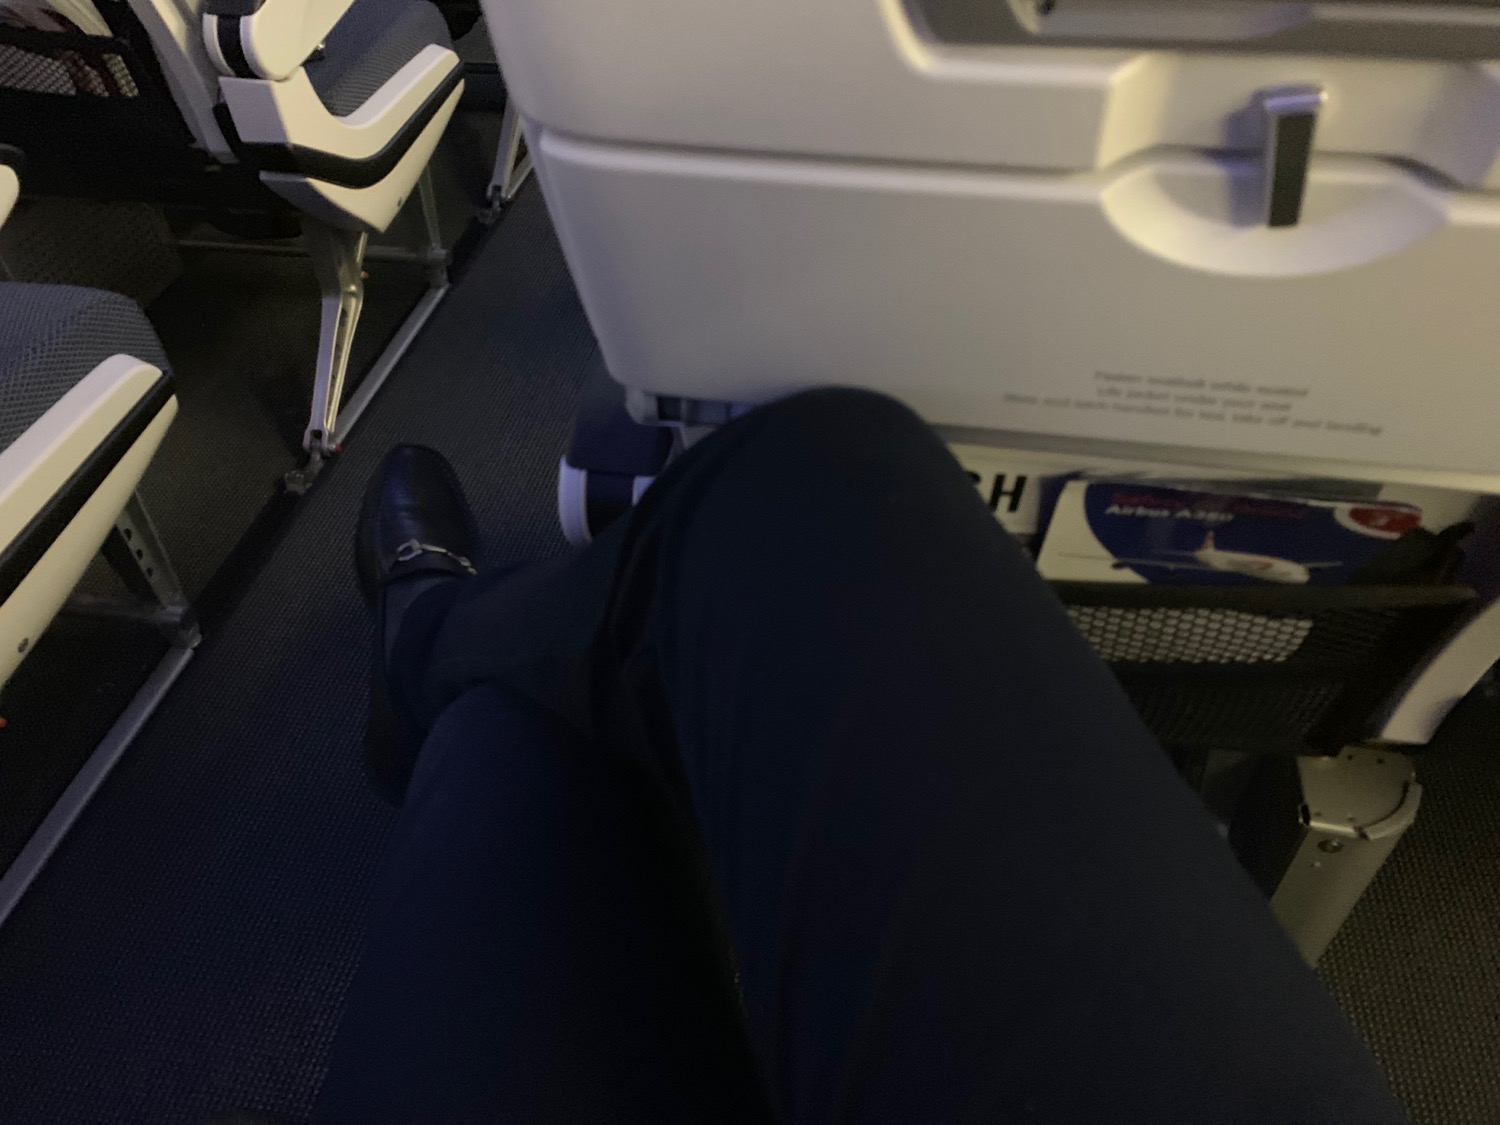 a person's leg and leg in an airplane